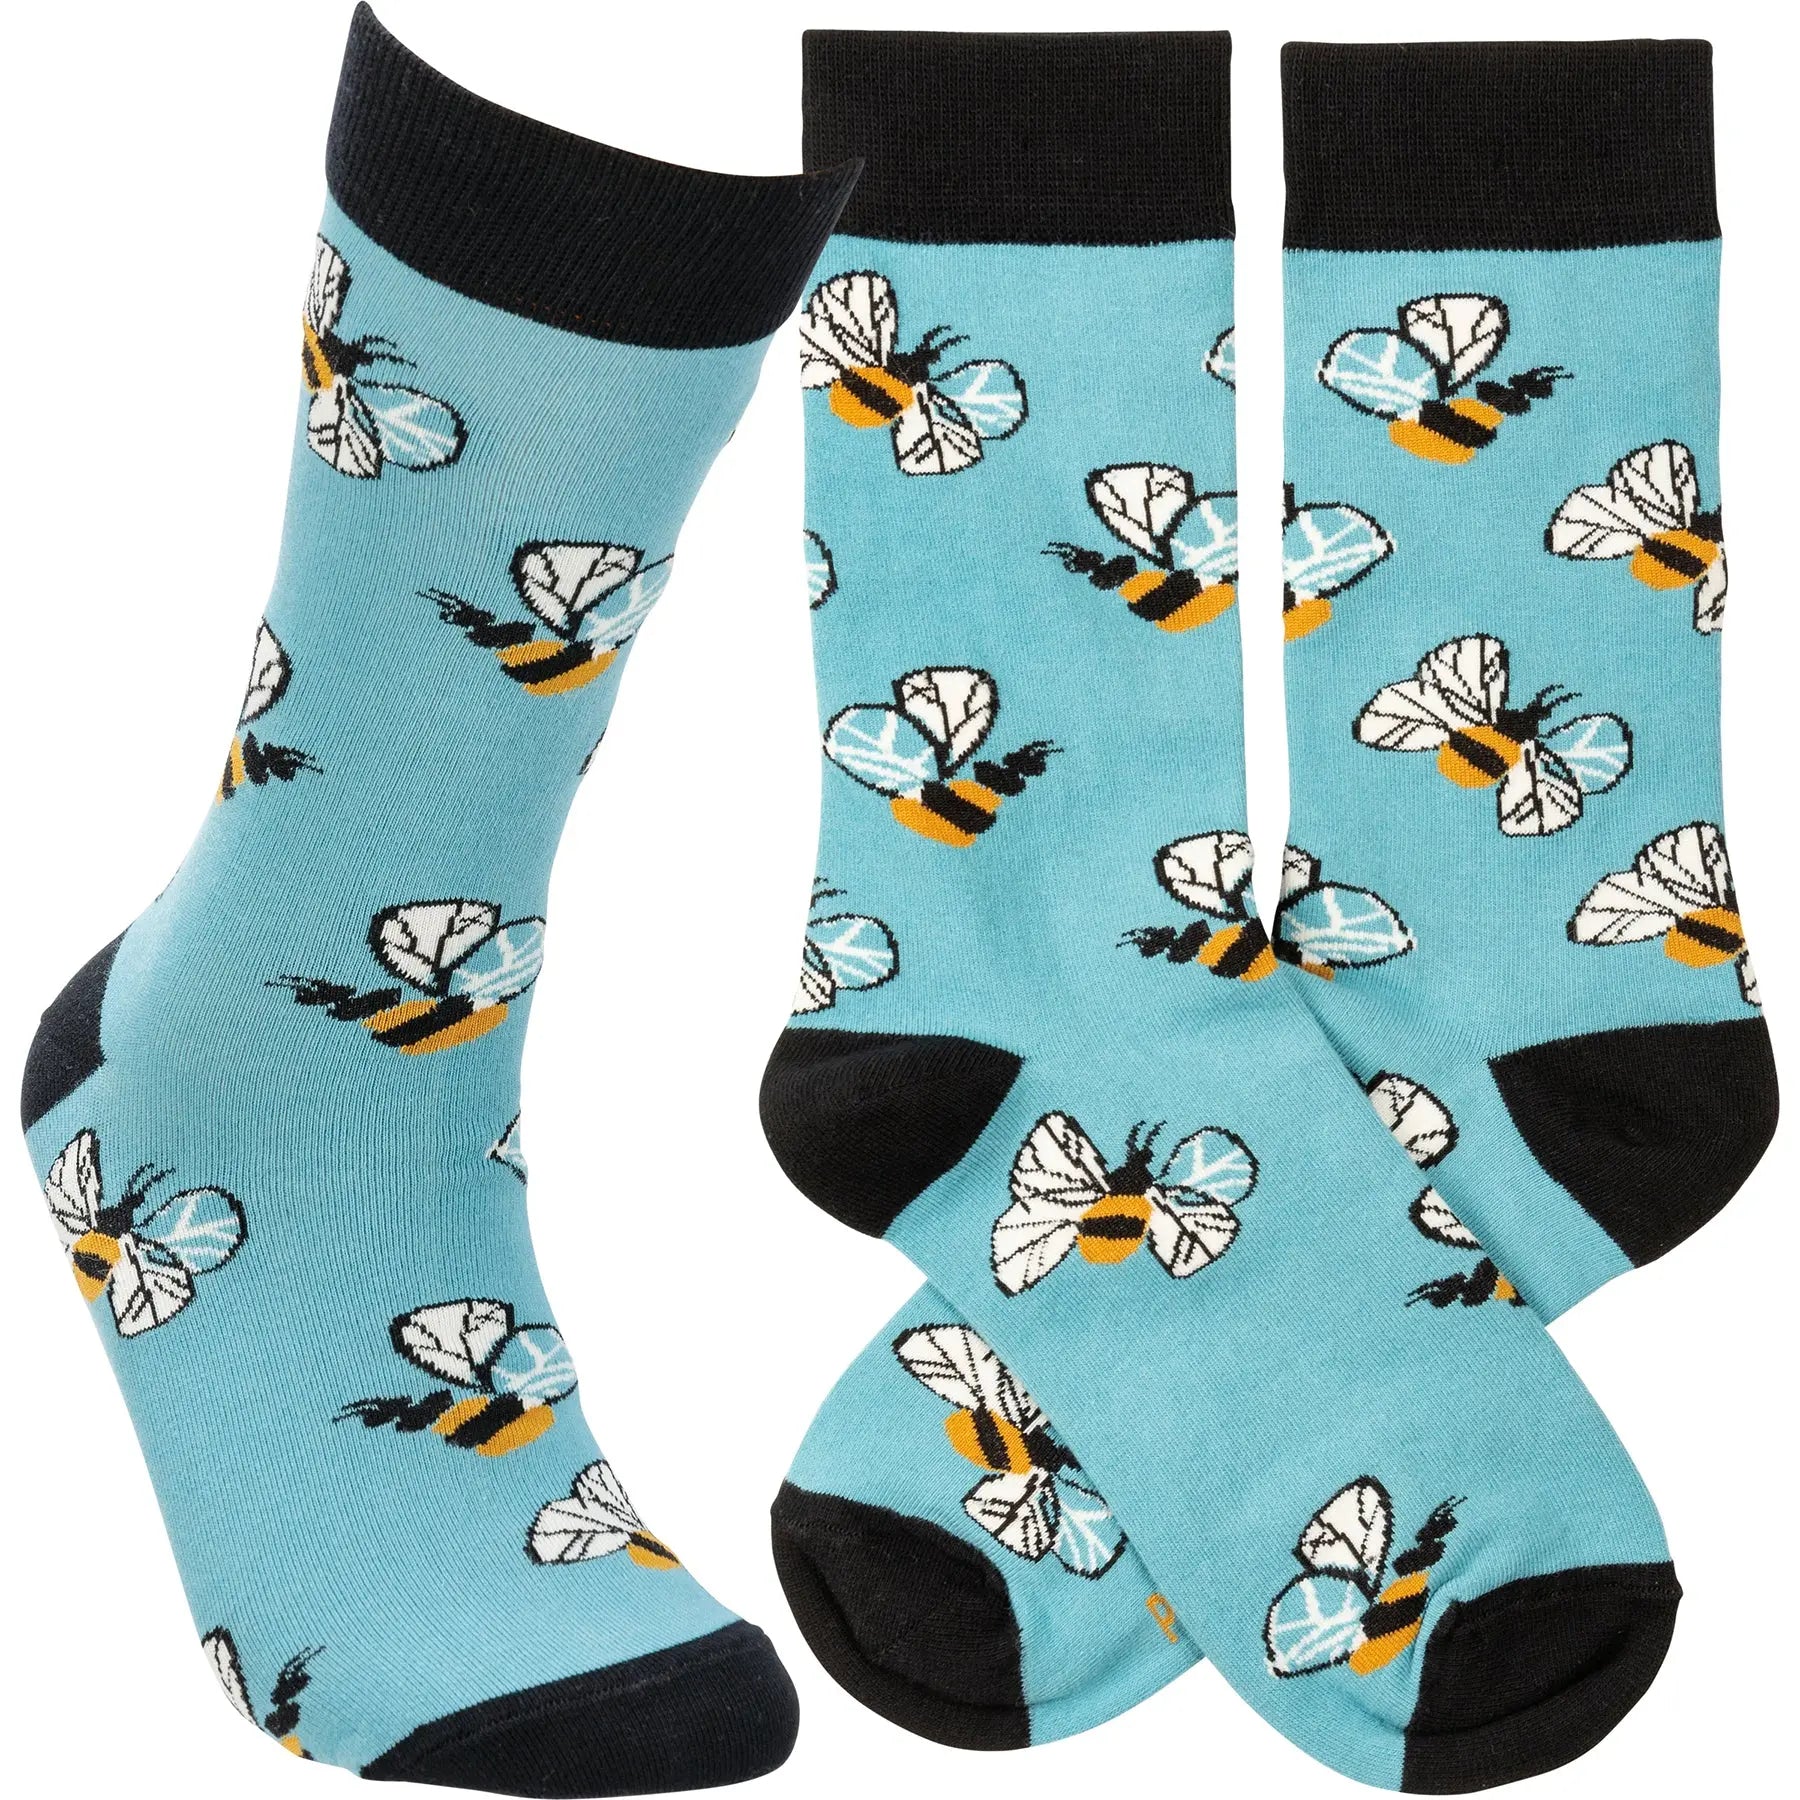 Primitives By Kathy - "Bees" Socks PRIMITIVES BY KATHY